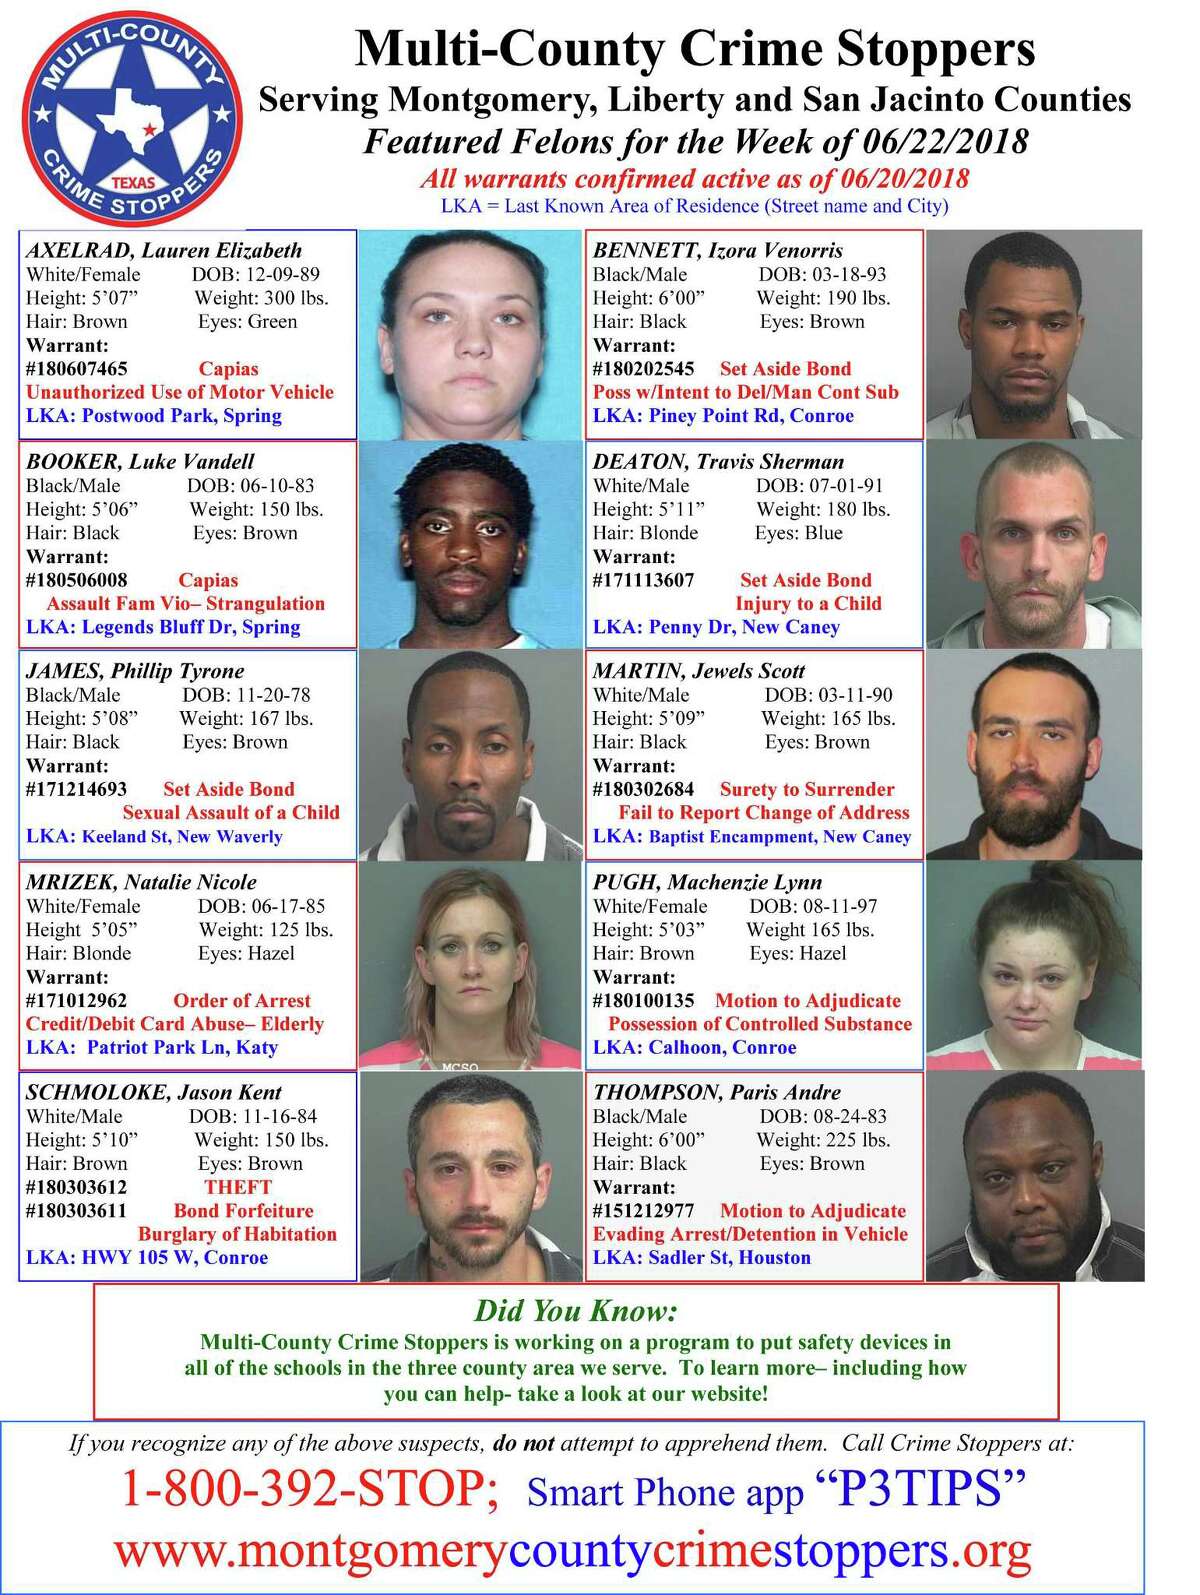 The Multi-County Crime Stoppers, which serves Liberty, San Jacinto and Montgomery counties, is asking for the public’s help in locating this week’s featured fugitives. If you have information about the whereabouts of anyone listed, please call the number listed.